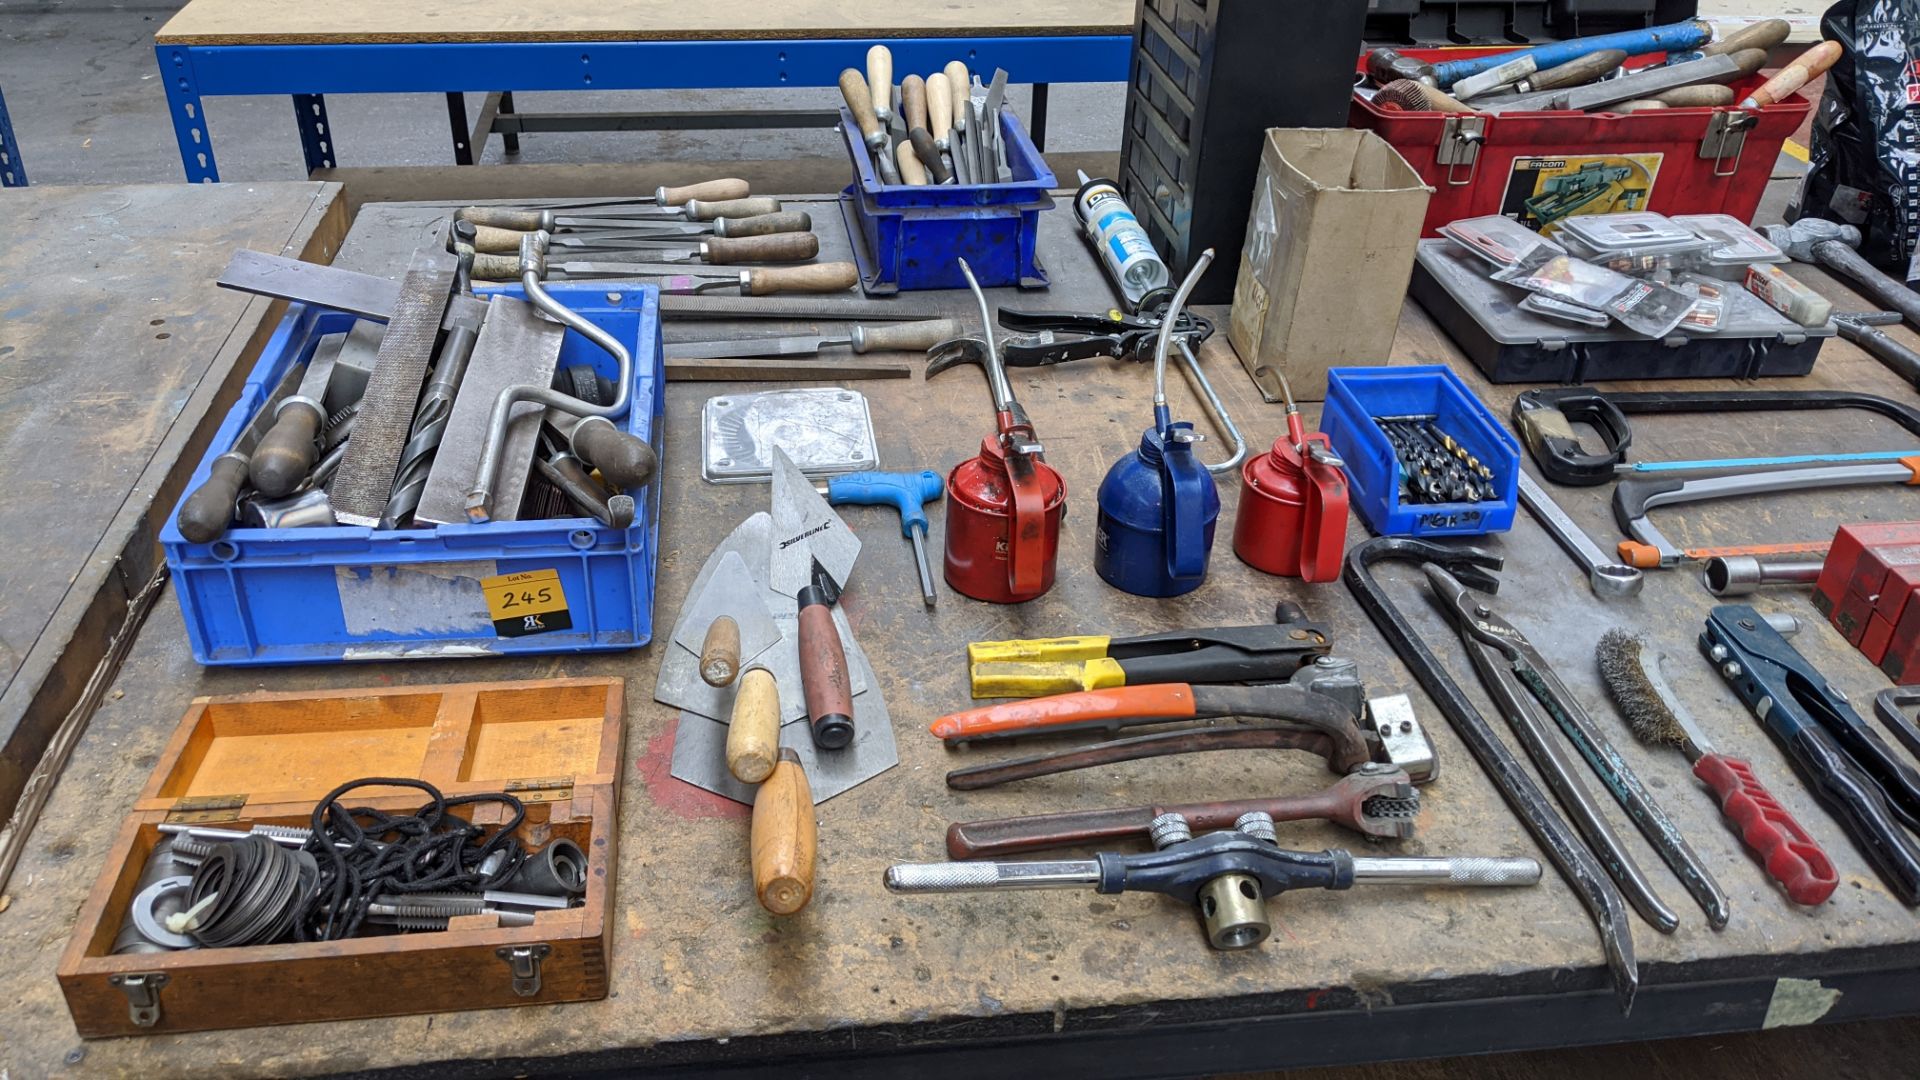 Bench & contents including vice, hand tools, riveting equipment, face masks & other PPE, chisels & - Image 6 of 12